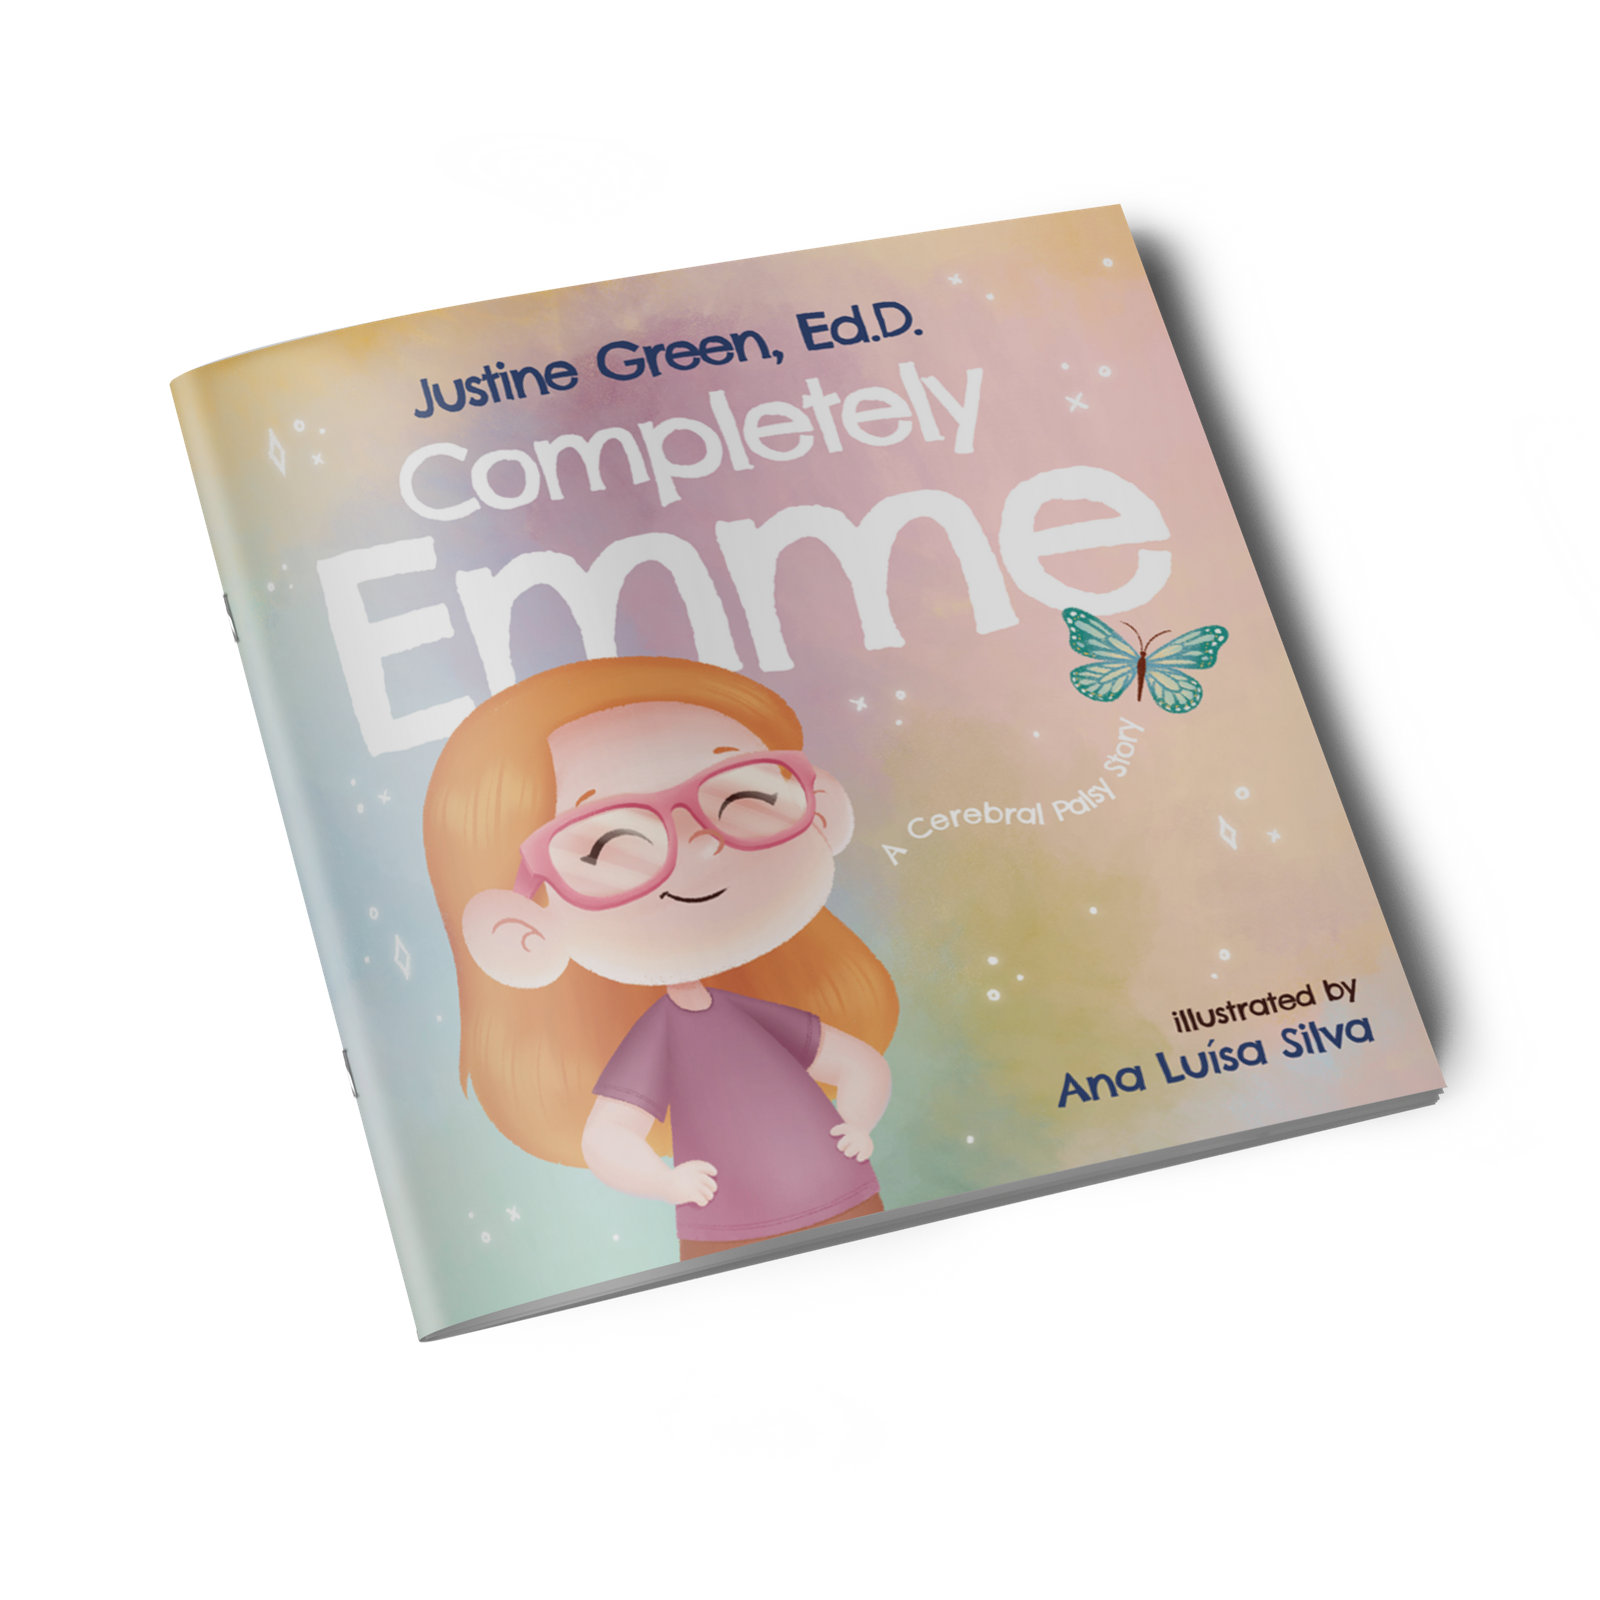 Completely Emme: A Cerebral Palsy Story